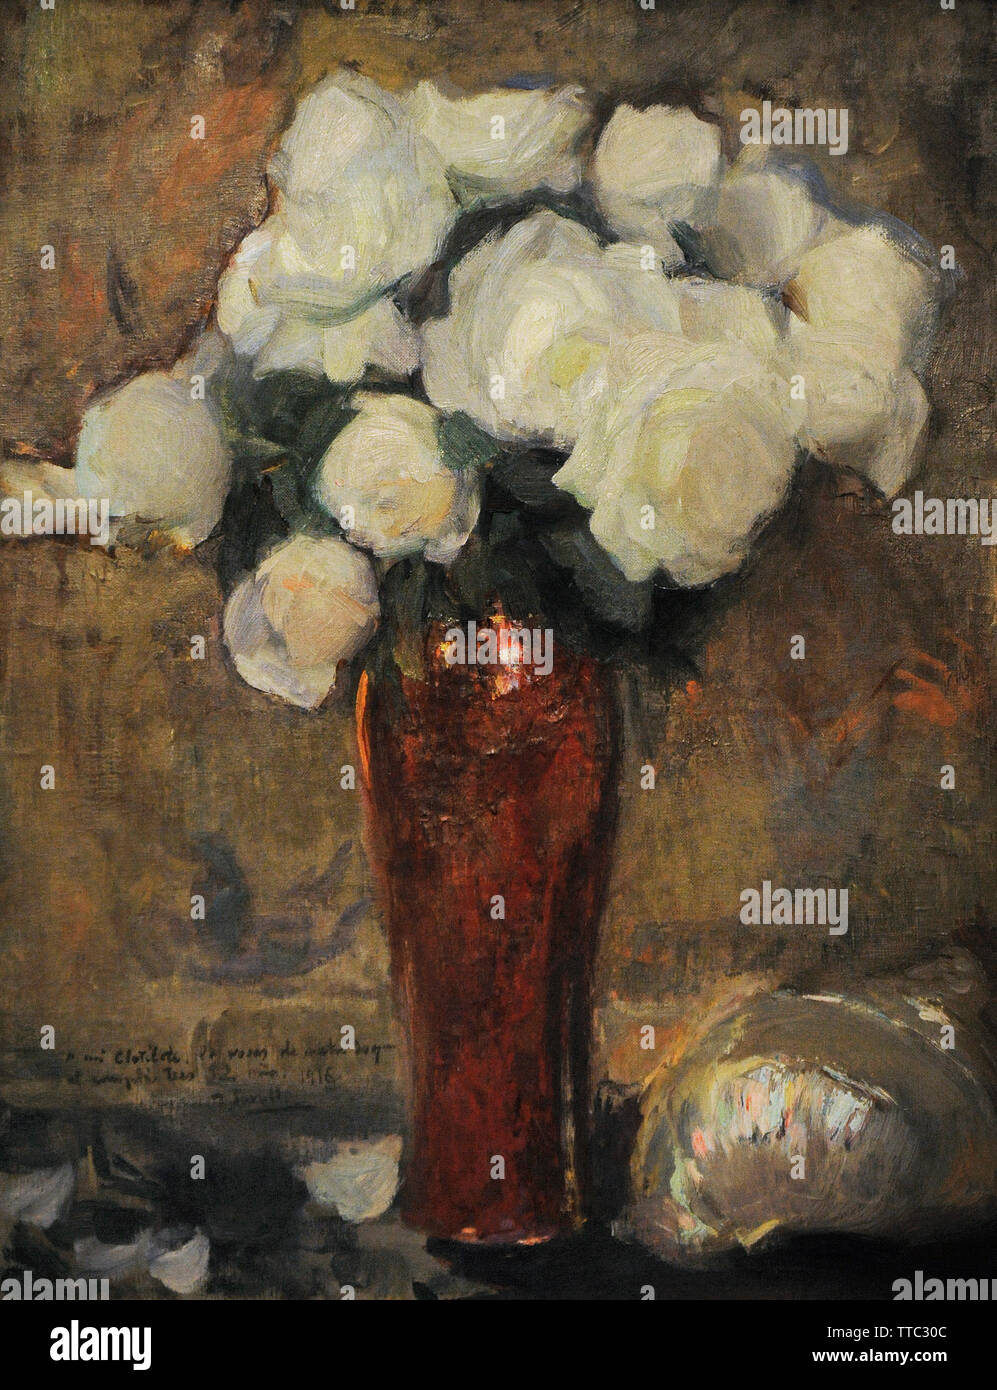 Joaquin Sorolla y Bastida (1863-1923). Spanish painter. White roses, 1916. Dedication:  'To my Clotilde. The roses of our Joaquin / at the age of 52. 1916 / J. Sorolla'. It refers to the bouquet that the son had given to his mother that day. Oil on canvas, 60 x 47 cm. Sorolla Museum. Madrid. Spain. Stock Photo